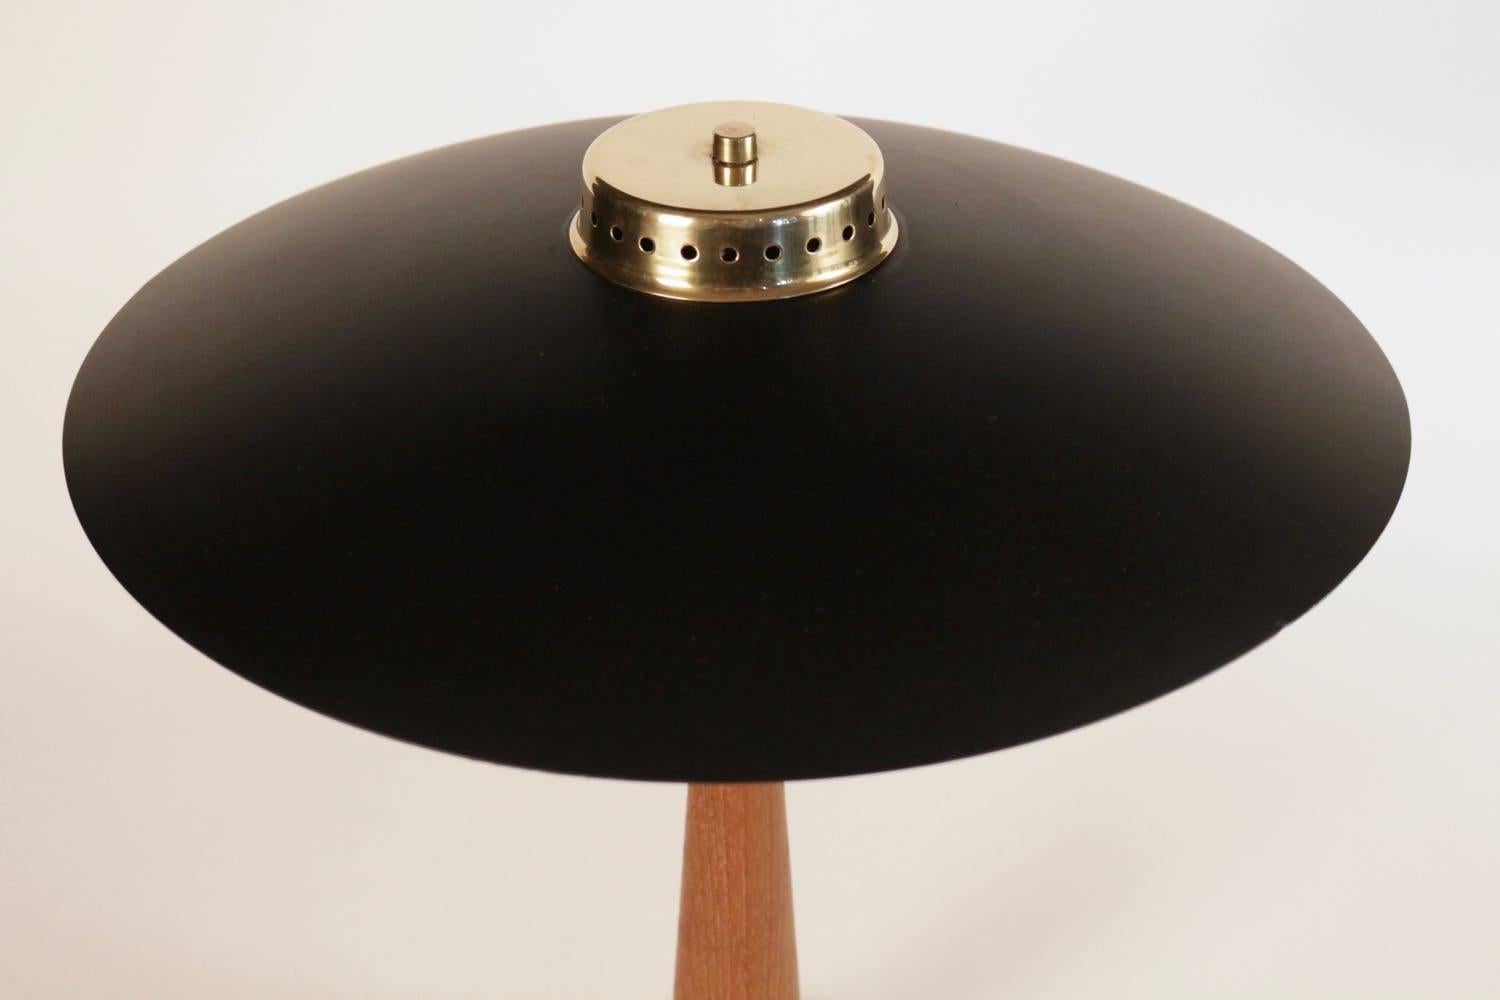 1950s elegant table lamp by Maison Stilnovo referenced on catalog.

Danish Scandinavian style, Stilnovo Edition, Italy.

The weighted brass base has an integrated switch and a solid wood conical pedestal. The lampshade is made of black lacquered